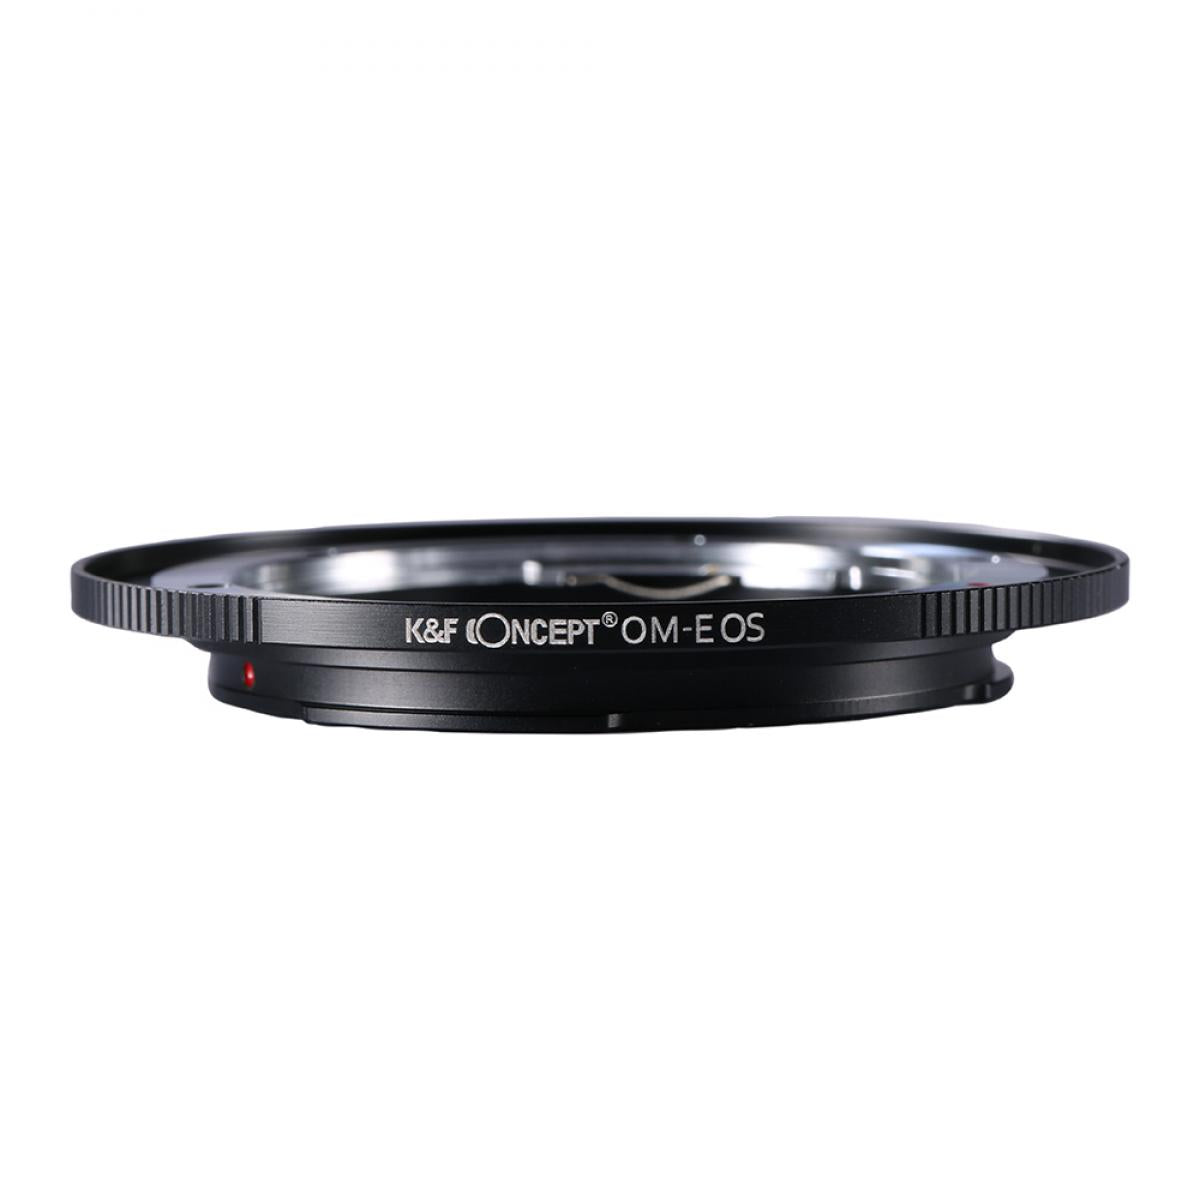 K&F Olympus OM Lenses to Canon EOS Mount Camera Adapter K&F Concept Lens Mount Adapter